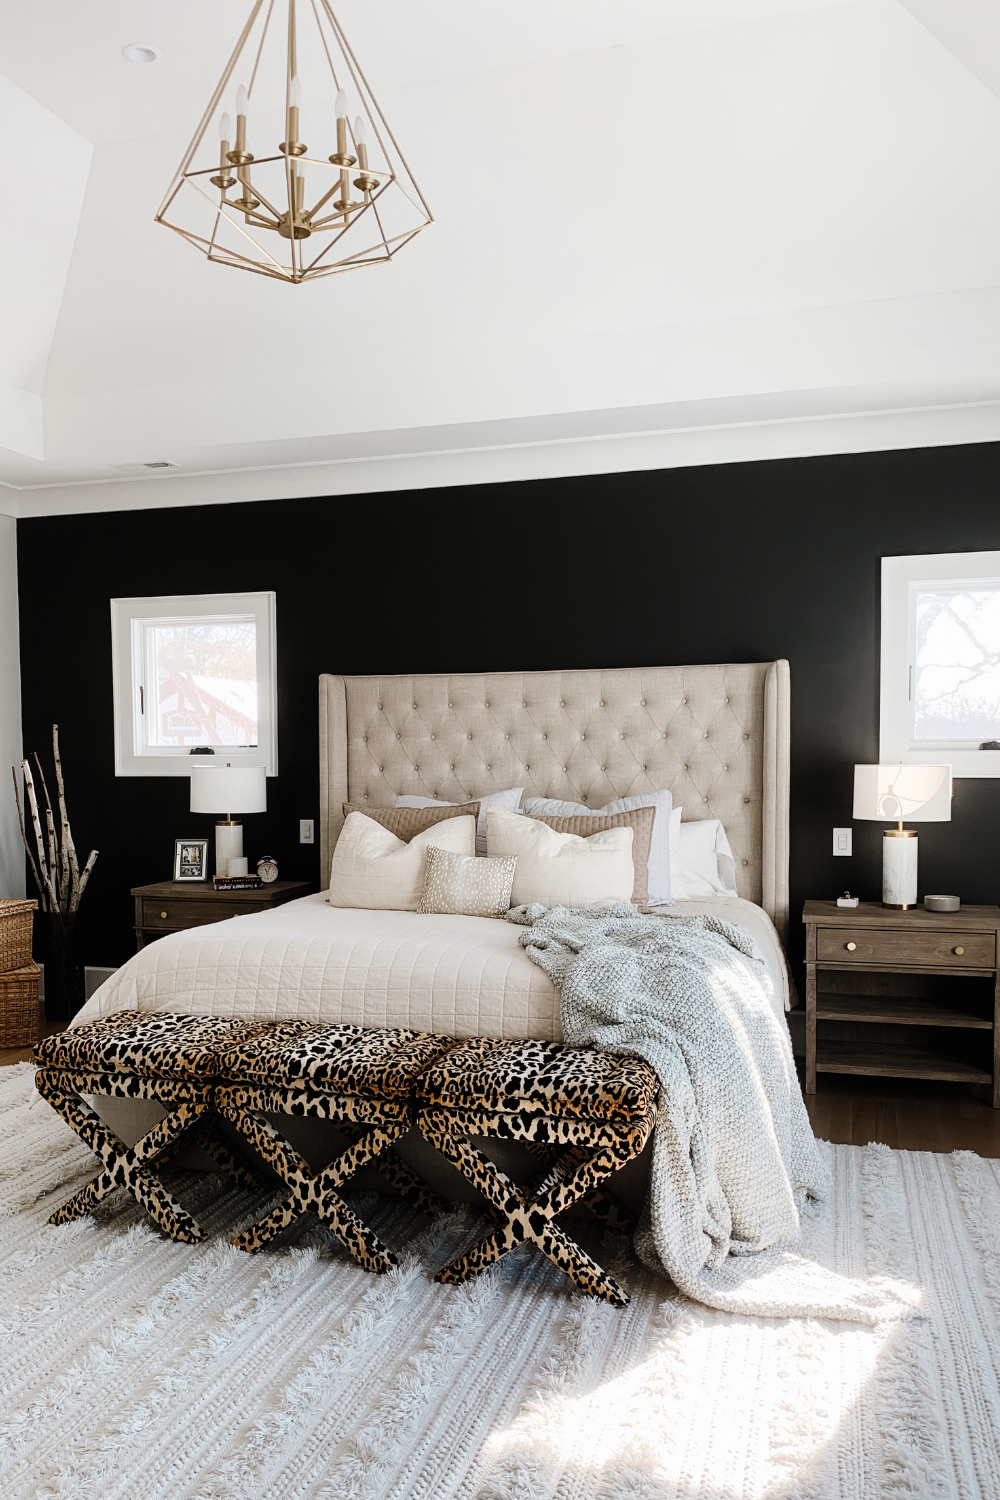 How to Style a Black Accent Wall